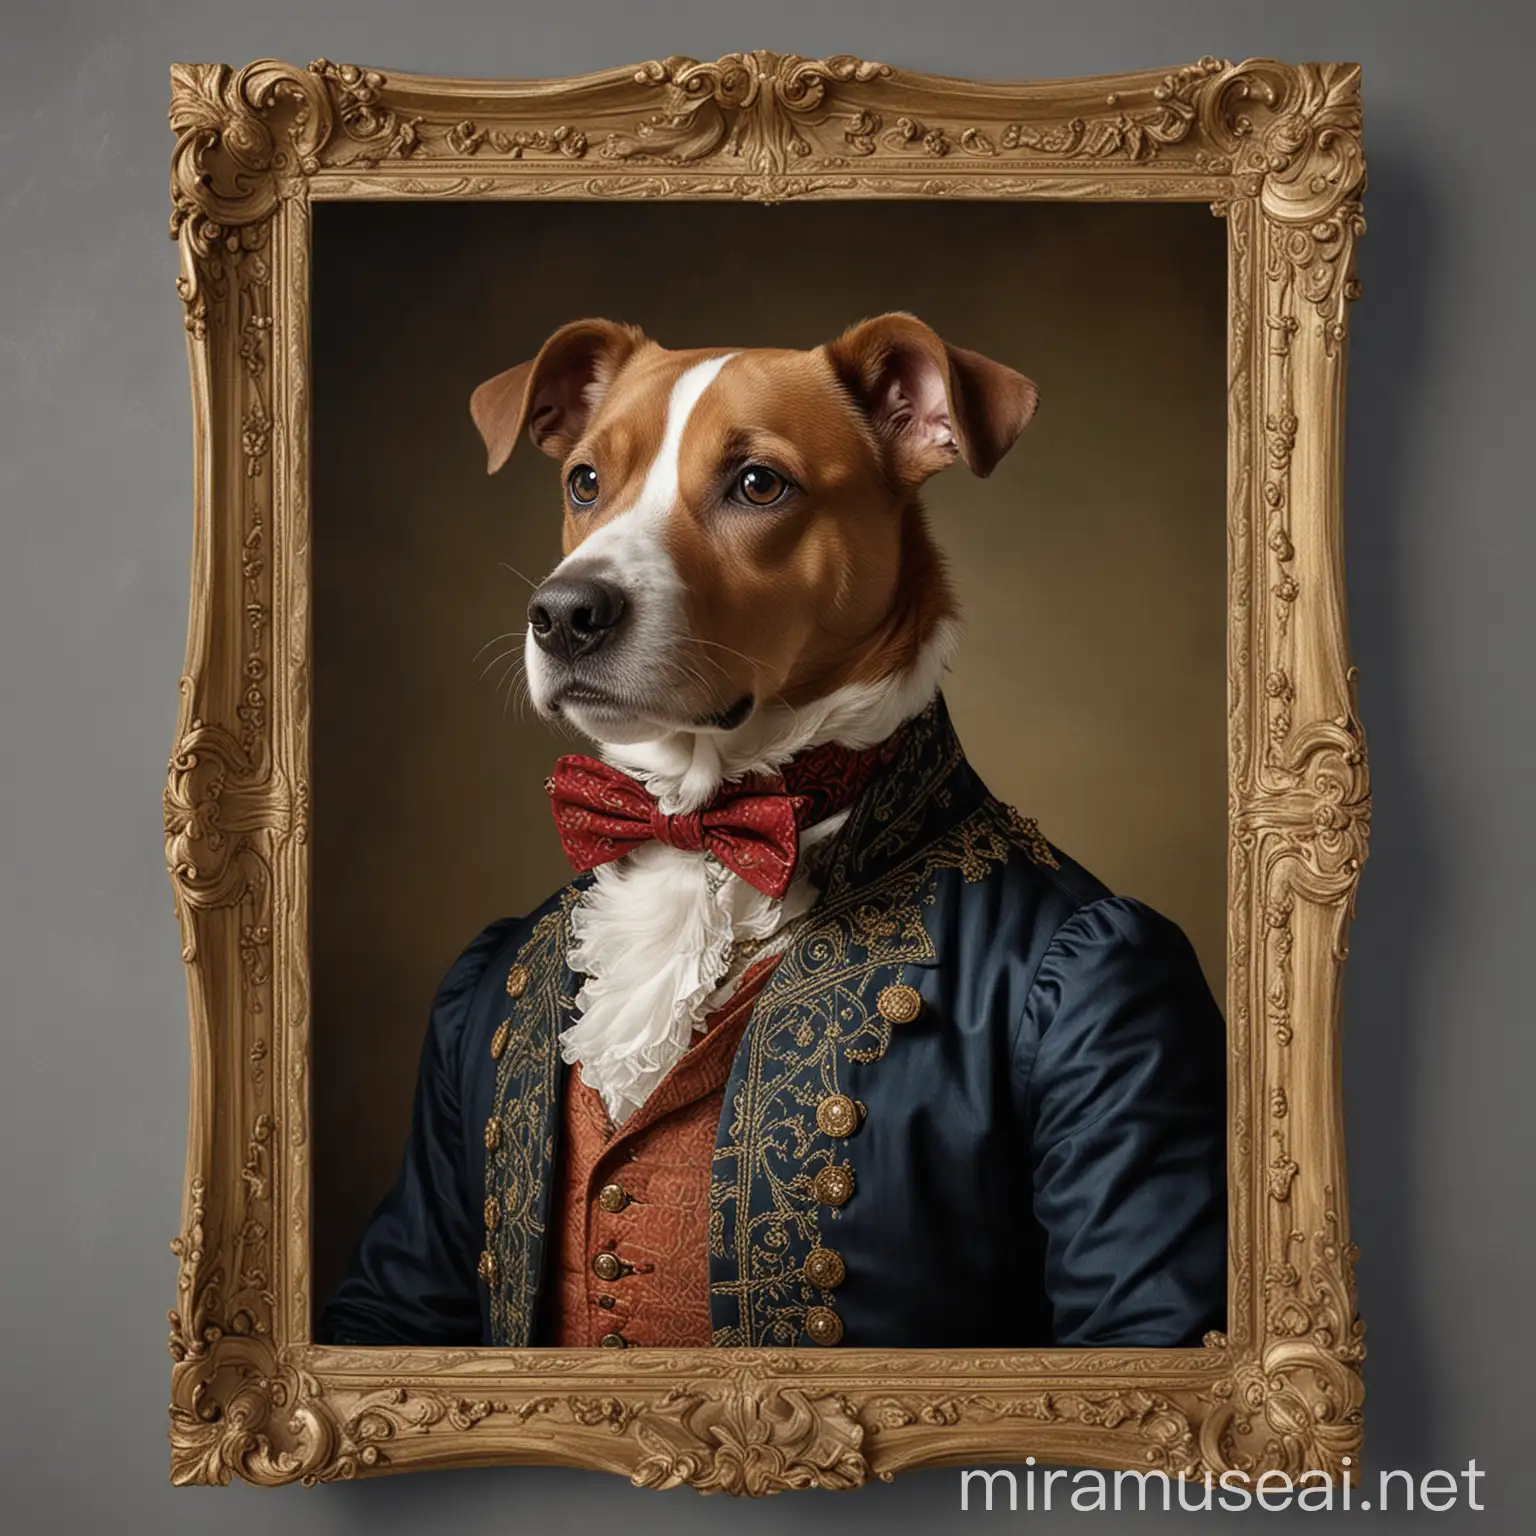 Create a high-quality, visually stunning canvas featuring a dog depicted as a gentelman wearing the clothes of the XVII century gentleman. Draw inspiration from  the historic pictures, incorporating intricate design and craftsmanship. Ensure the entire head, including the top, is fully visible within the frame.